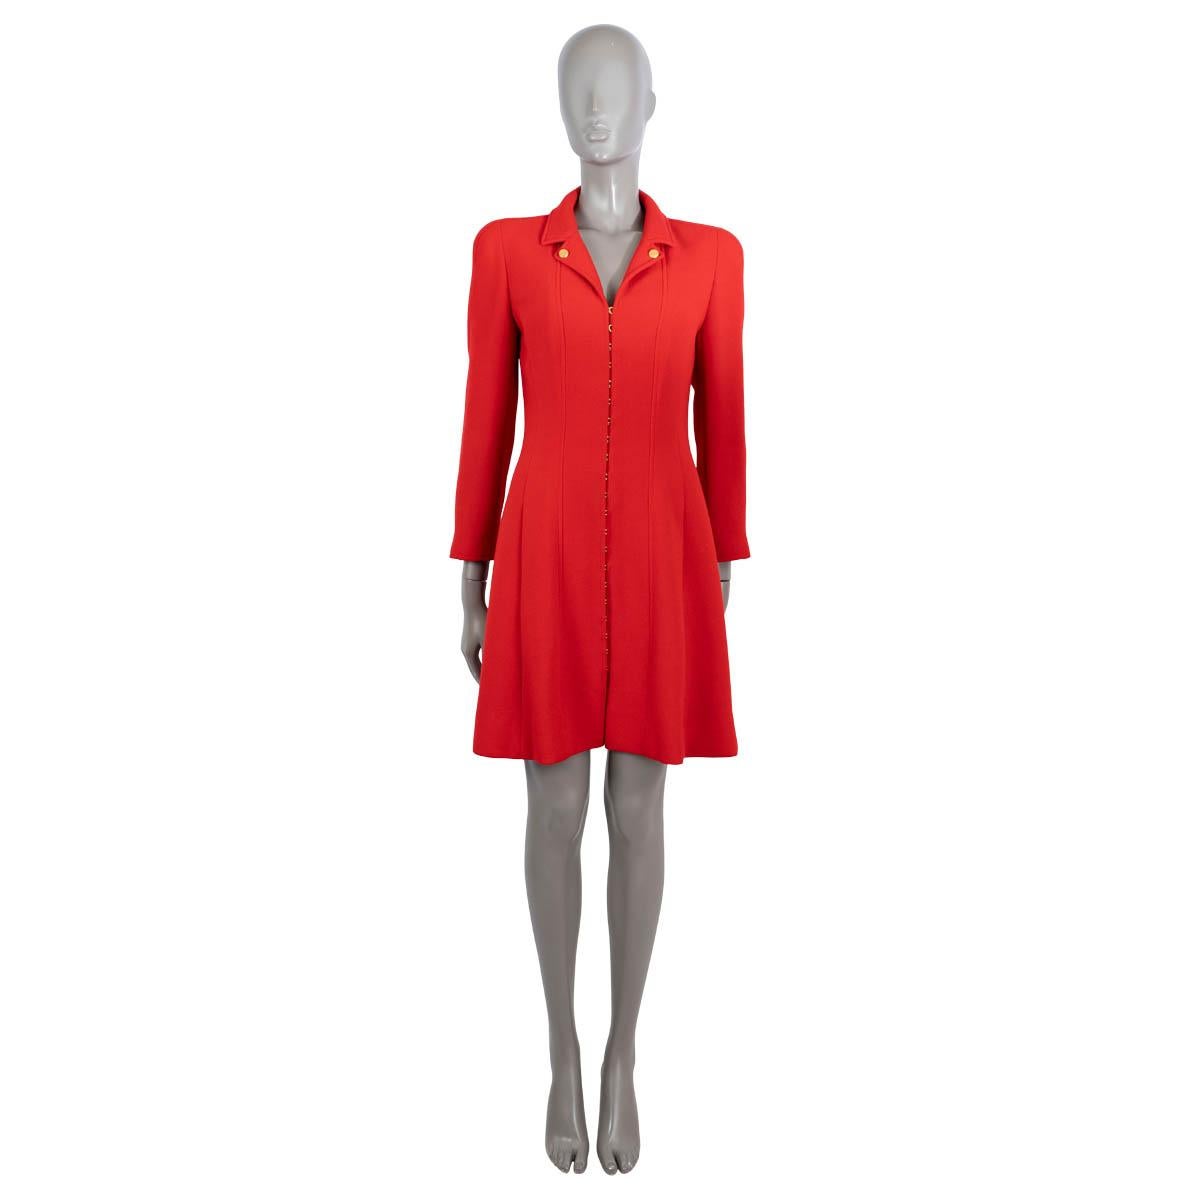 100% authentic Chanel vintage coat in red wool (100%). Features a tailored and flared silhouette, notched lapels with CC buttons, padded shoulders, buttoned cuffs and two slit pockets at the waist. Closes with gold-tone hook and eye on the front and